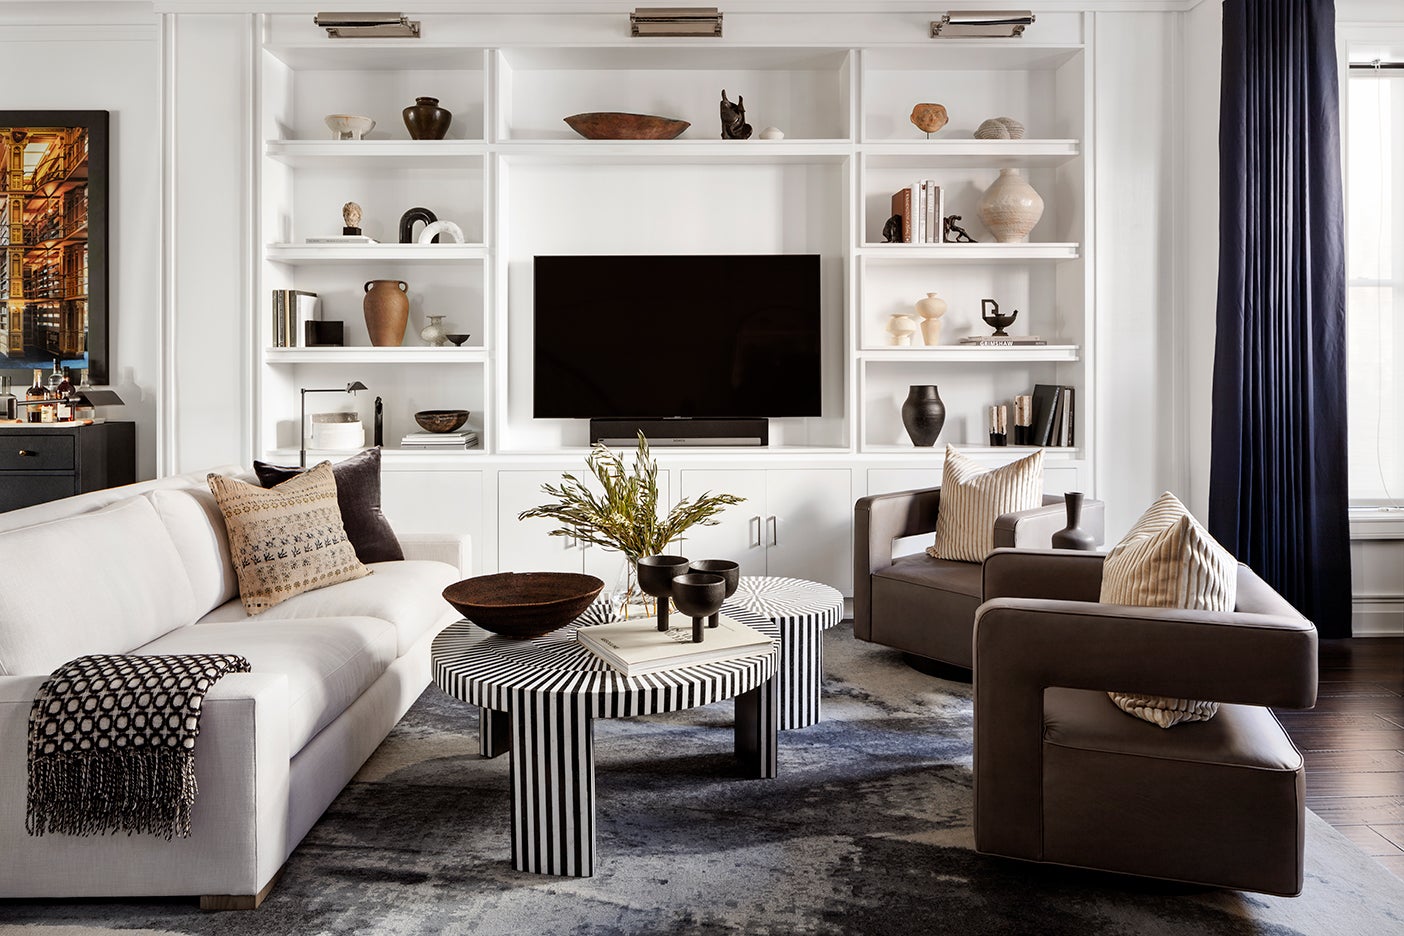 TV area with striped coffee tables